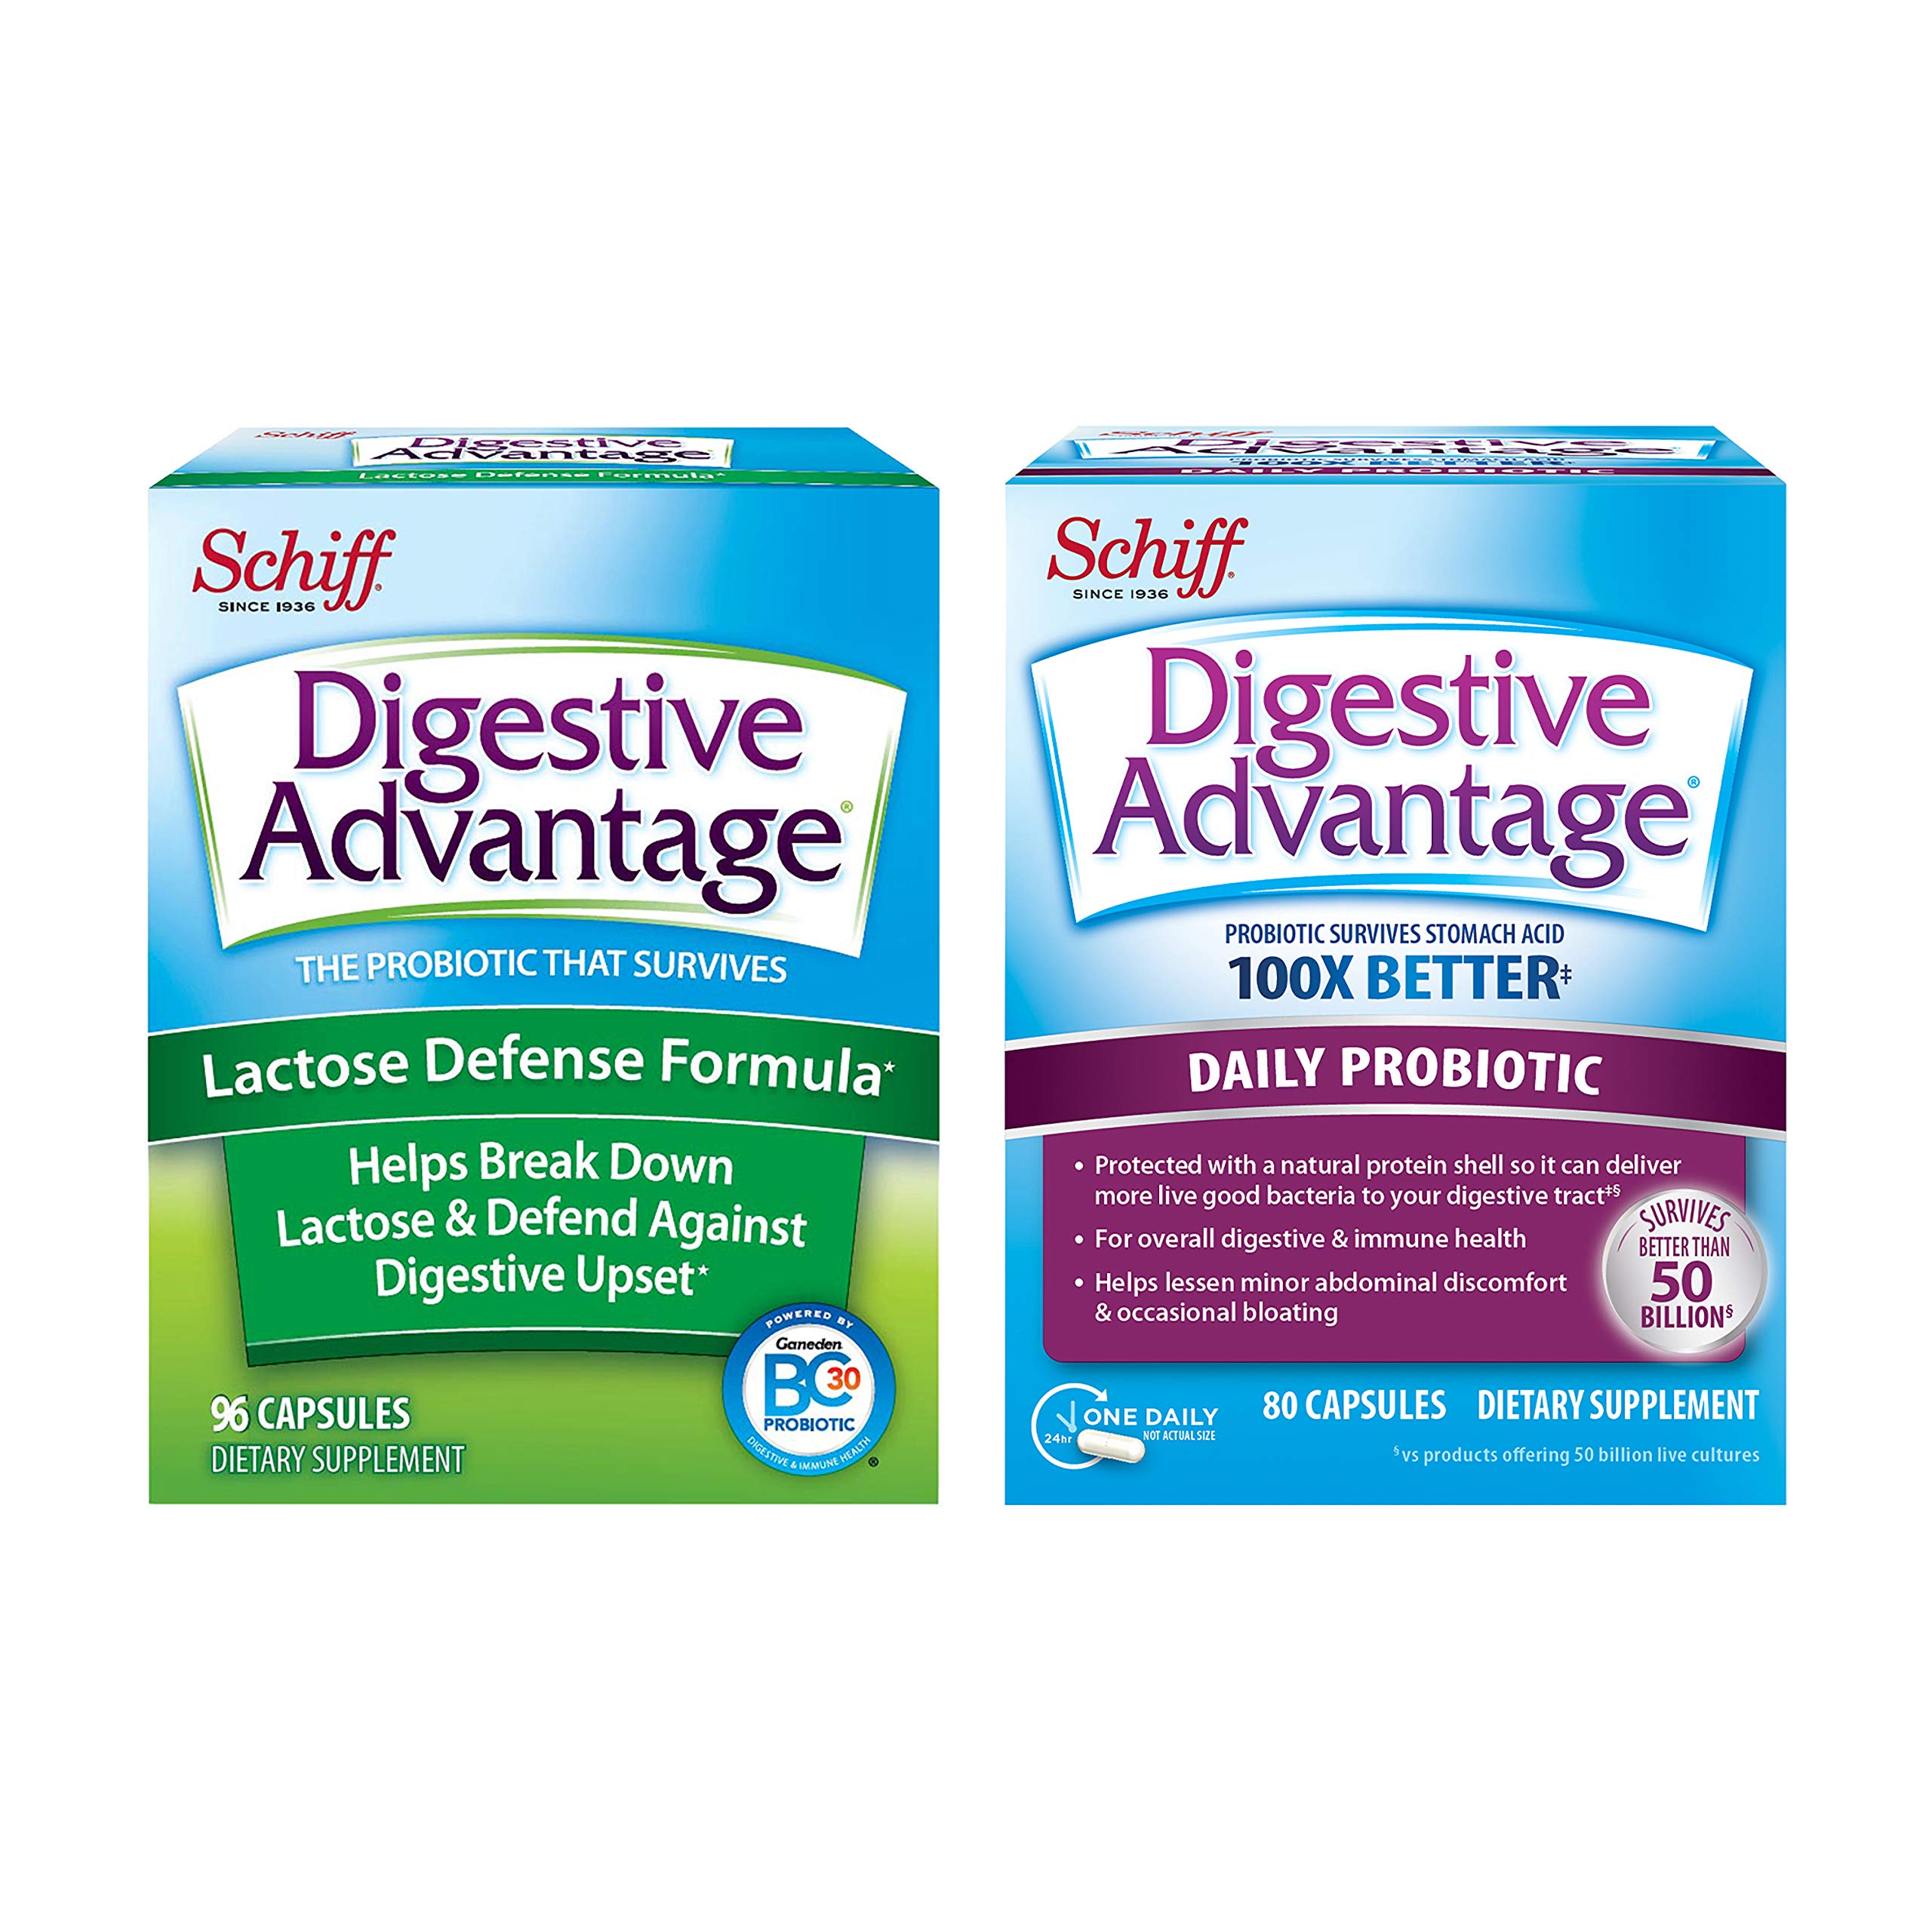 Digestive Advantage Daily Probiotic & Lactose Capsule Bundle - Daily Probitic Capsules (80ct Box) & IBS Capsules (96ct Box), Probiotics for Men & Women, for Digestive & Immune Support